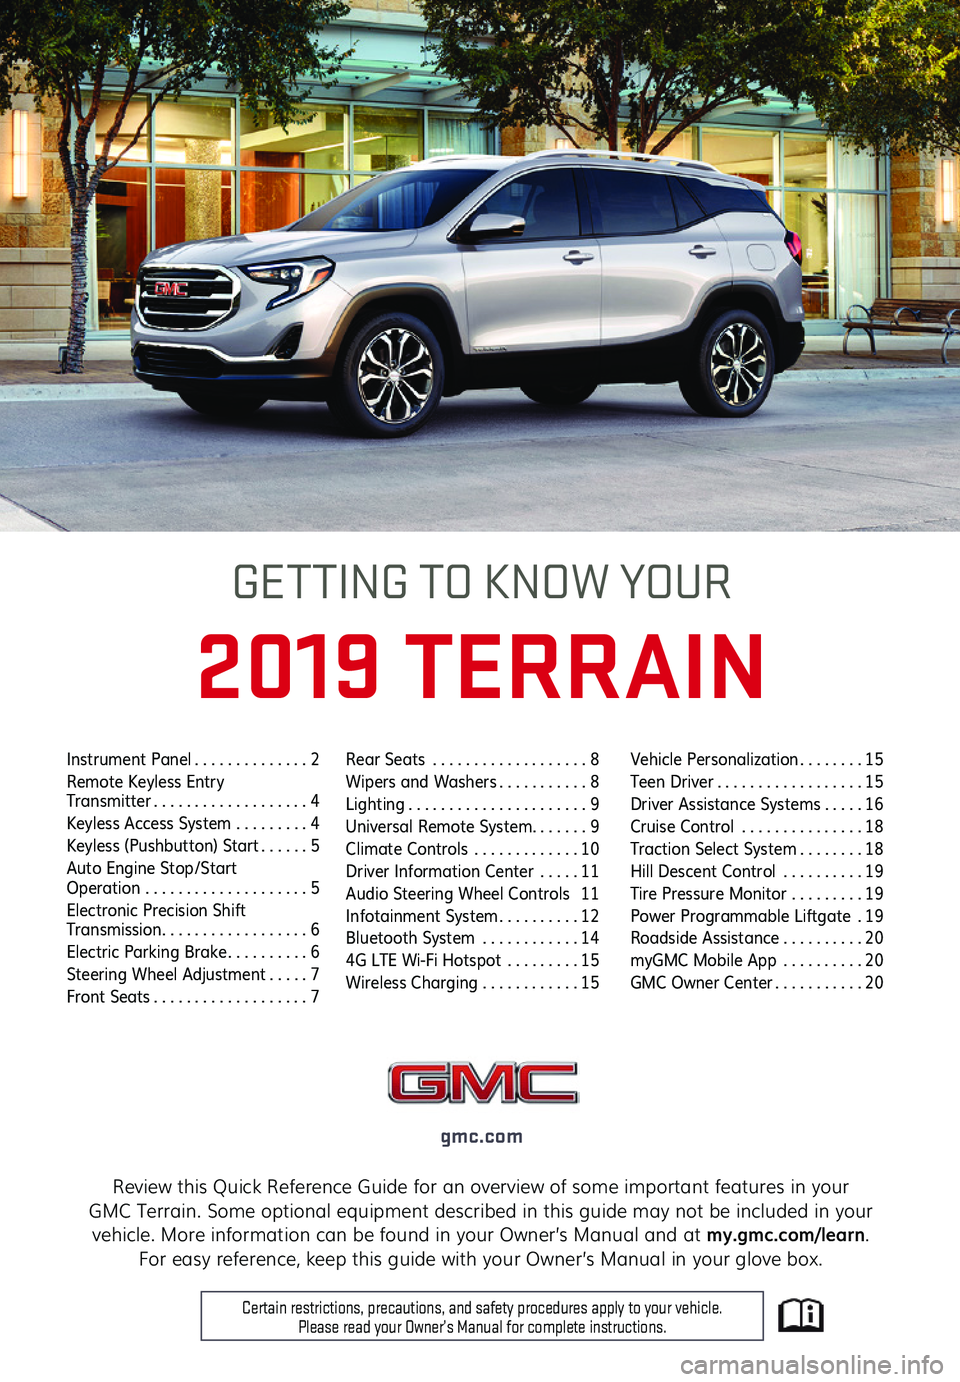 GMC TERRAIN 2019  Get To Know Guide 1
Review this Quick Reference Guide for an overview of some important features in your  GMC Terrain. Some optional equipment described in this guide may not be included in your vehicle. More informati